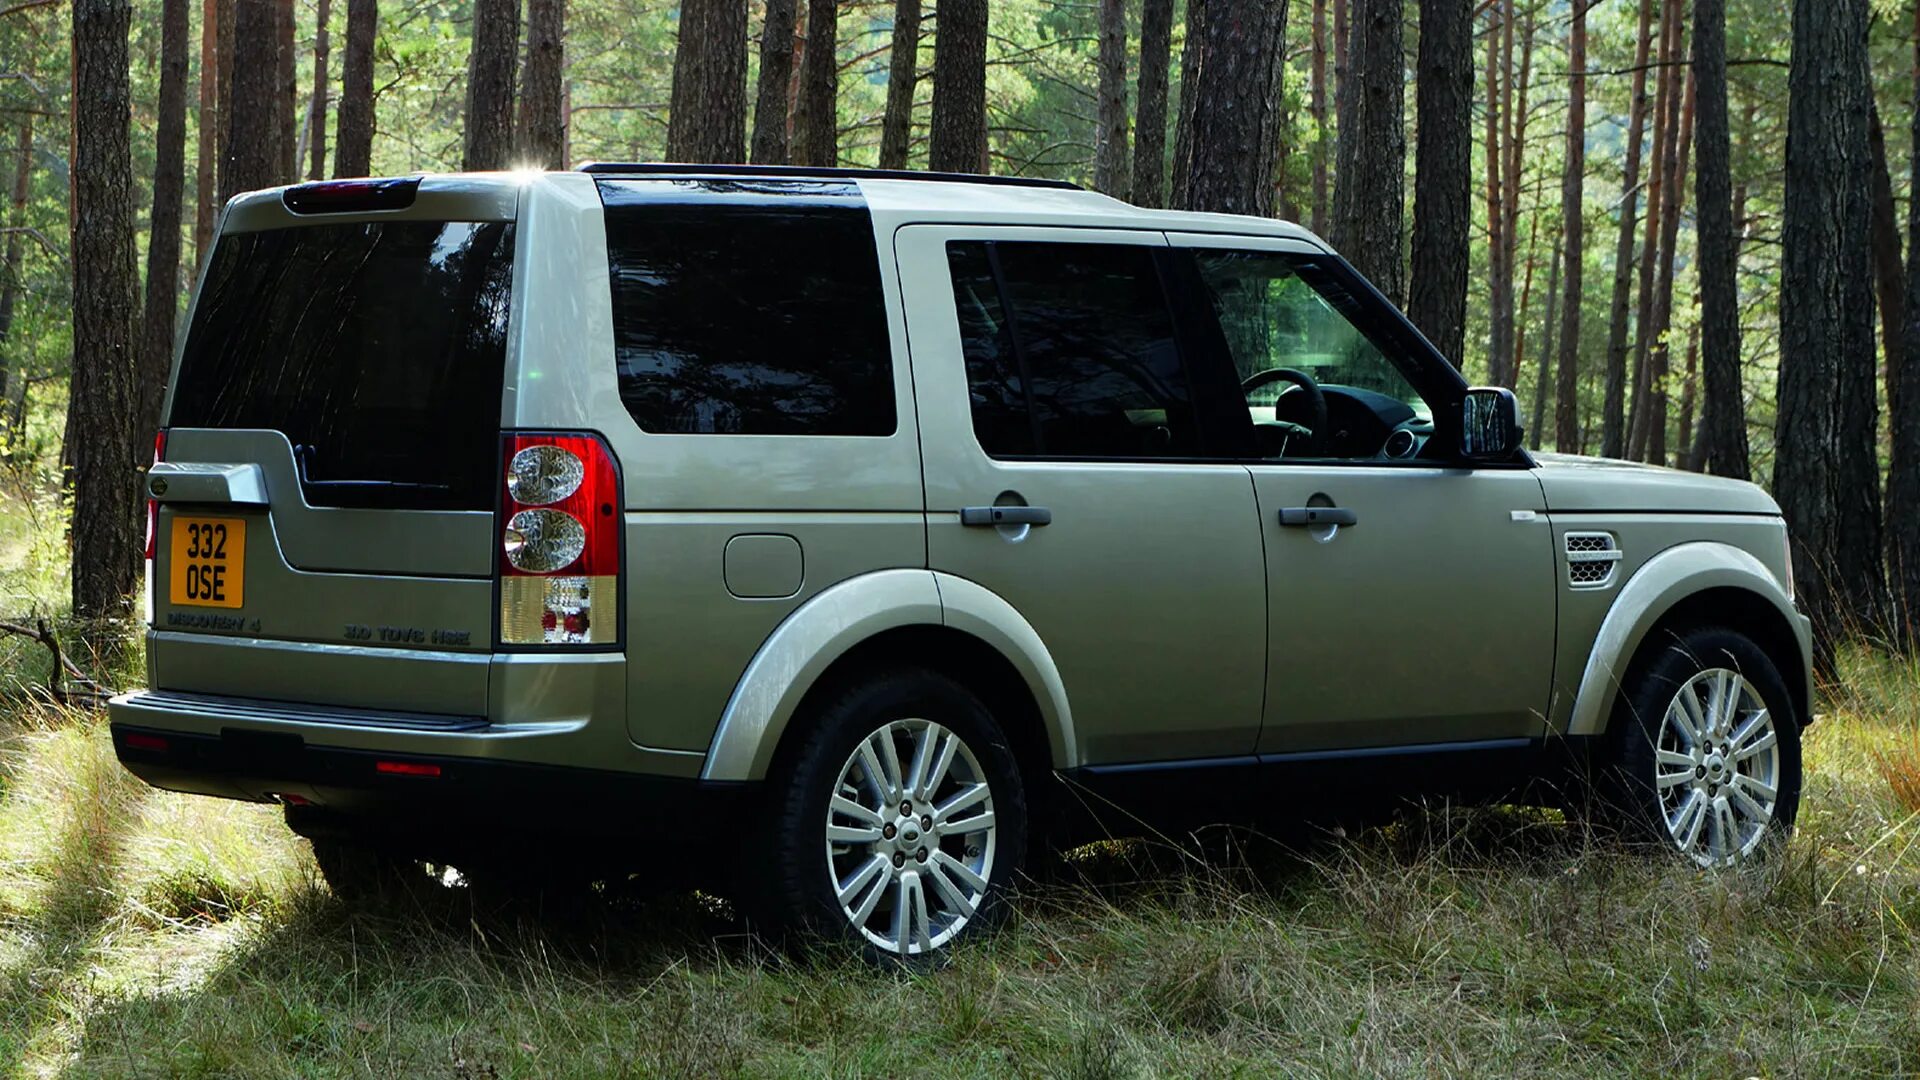 Land Rover Discovery 4. Ленд Ровер Дискавери 4 2009. Лэнд ровыер Дискавери 4. Ленд Ровер Дискавери 4 2014. Дискавери 2014